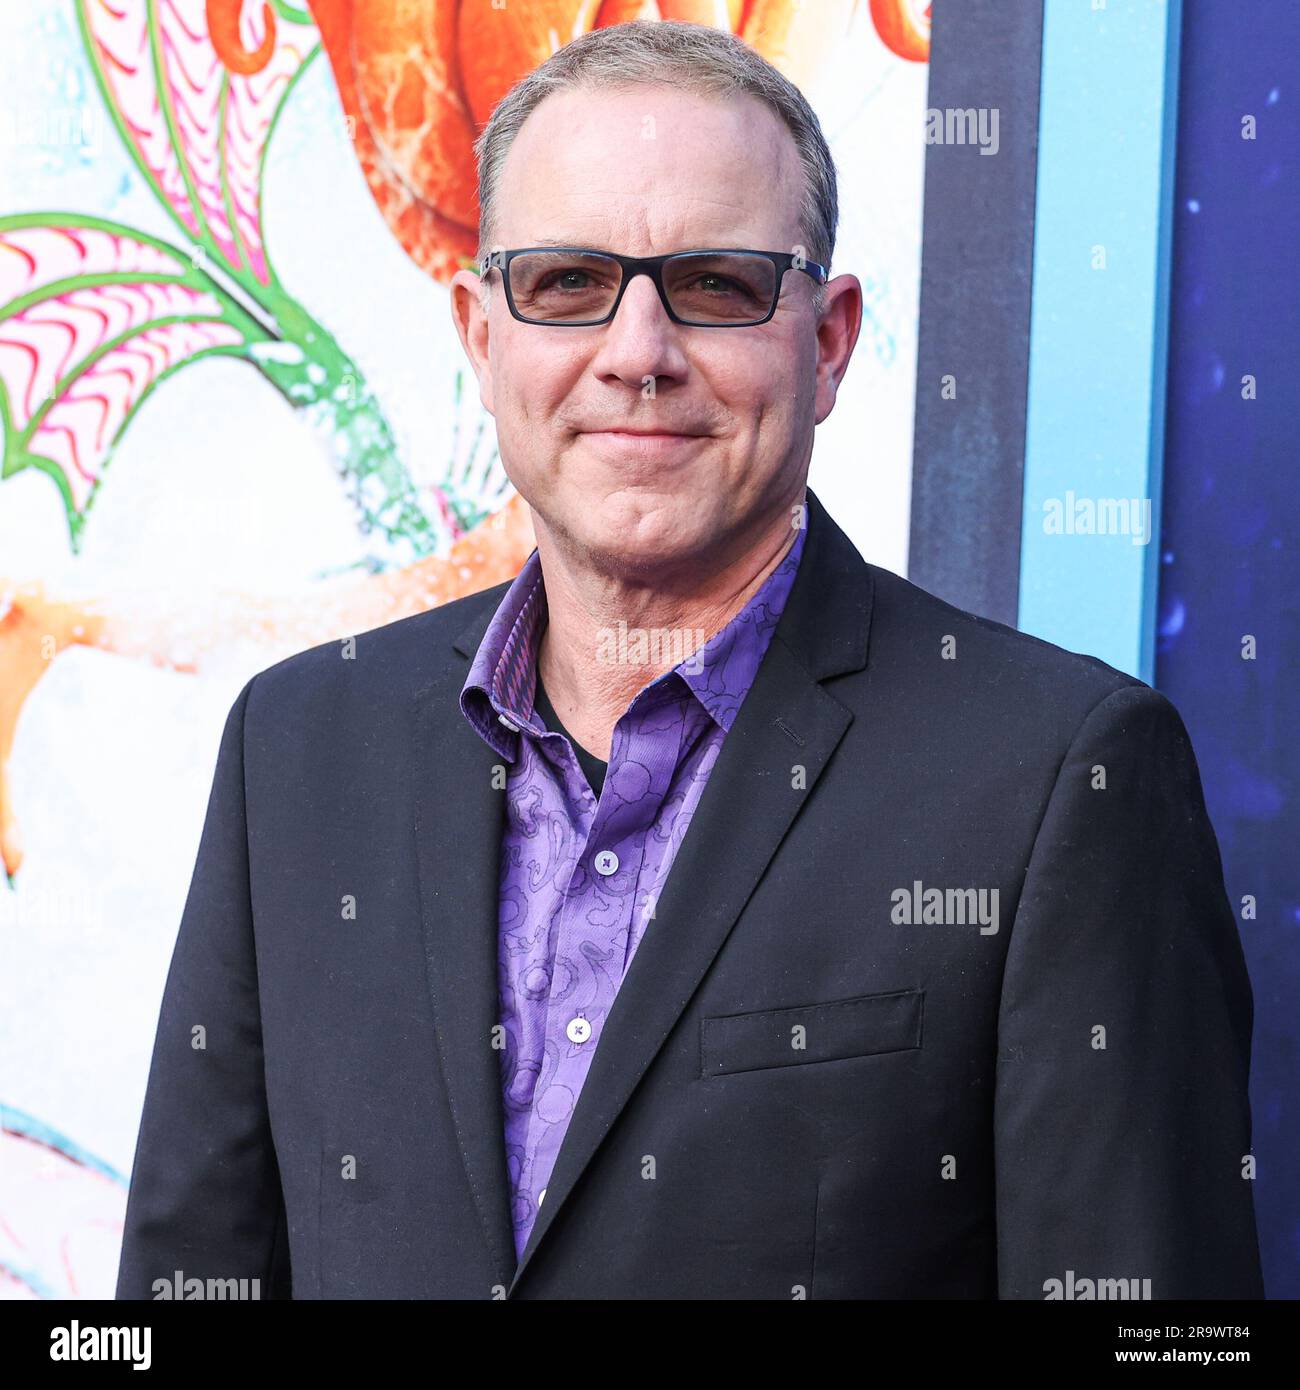 American filmmaker Kirk DeMicco arrives at the Los Angeles Premiere Of Universal Pictures And DreamWorks Animation's 'Ruby Gillman: Teenage Kraken' held at the TCL Chinese Theatre IMAX on June 28, 2023 in Hollywood, Los Angeles, California, United States. (Photo by Xavier Collin/Image Press Agency) Stock Photo